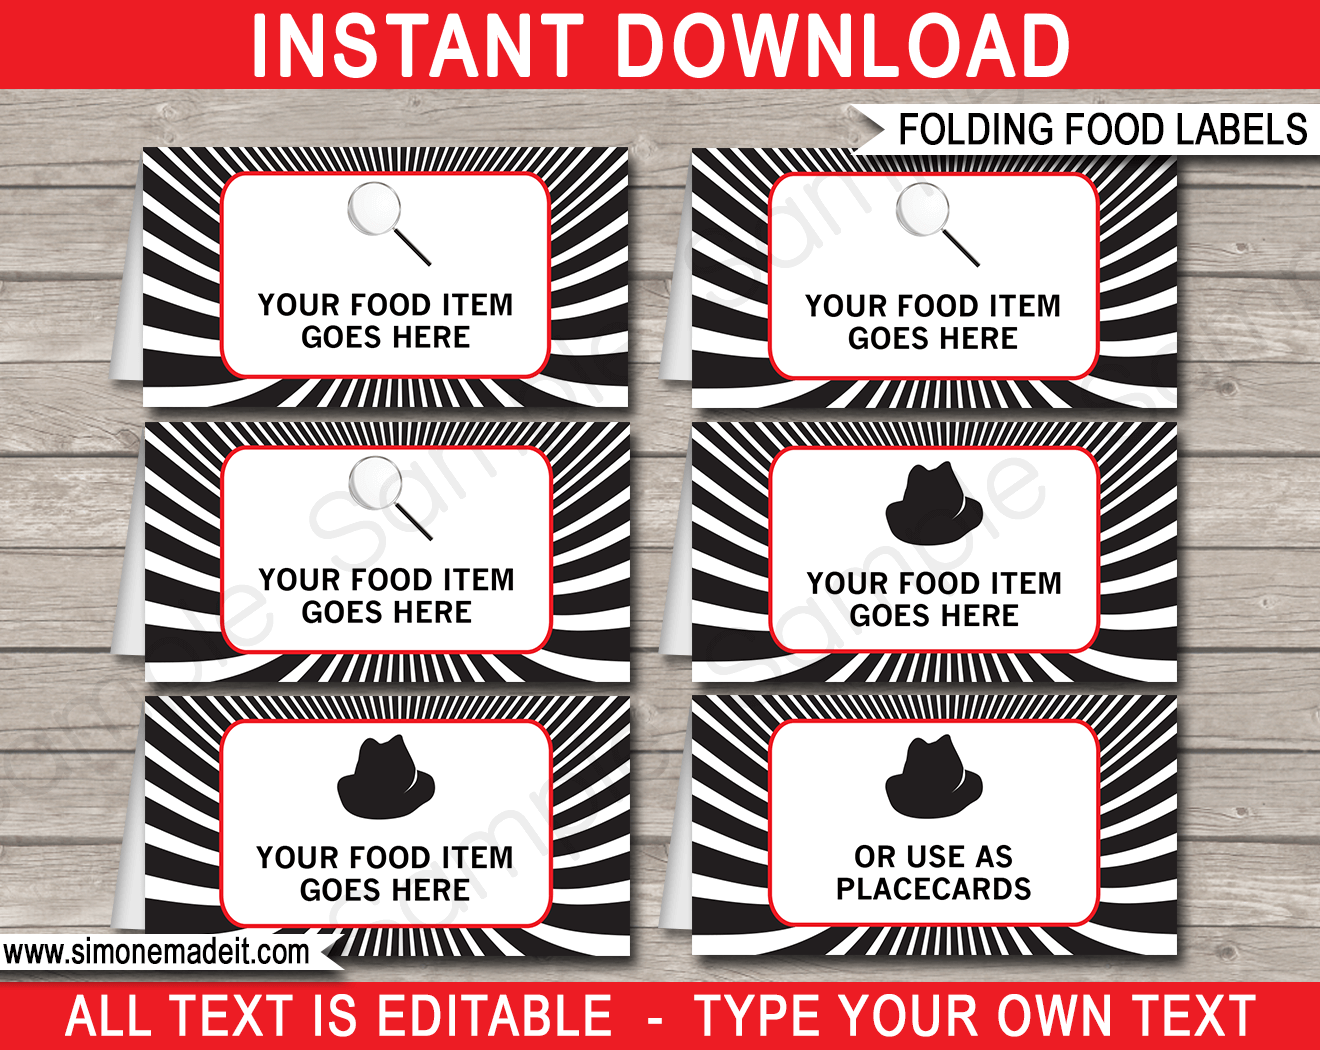 Printable Spy Party Food Labels Template | Food Tags | Place Cards | Secret Agent Birthday Party | DIY Editable Text | $3.00 INSTANT DOWNLOAD via SIMONEmadeit.com